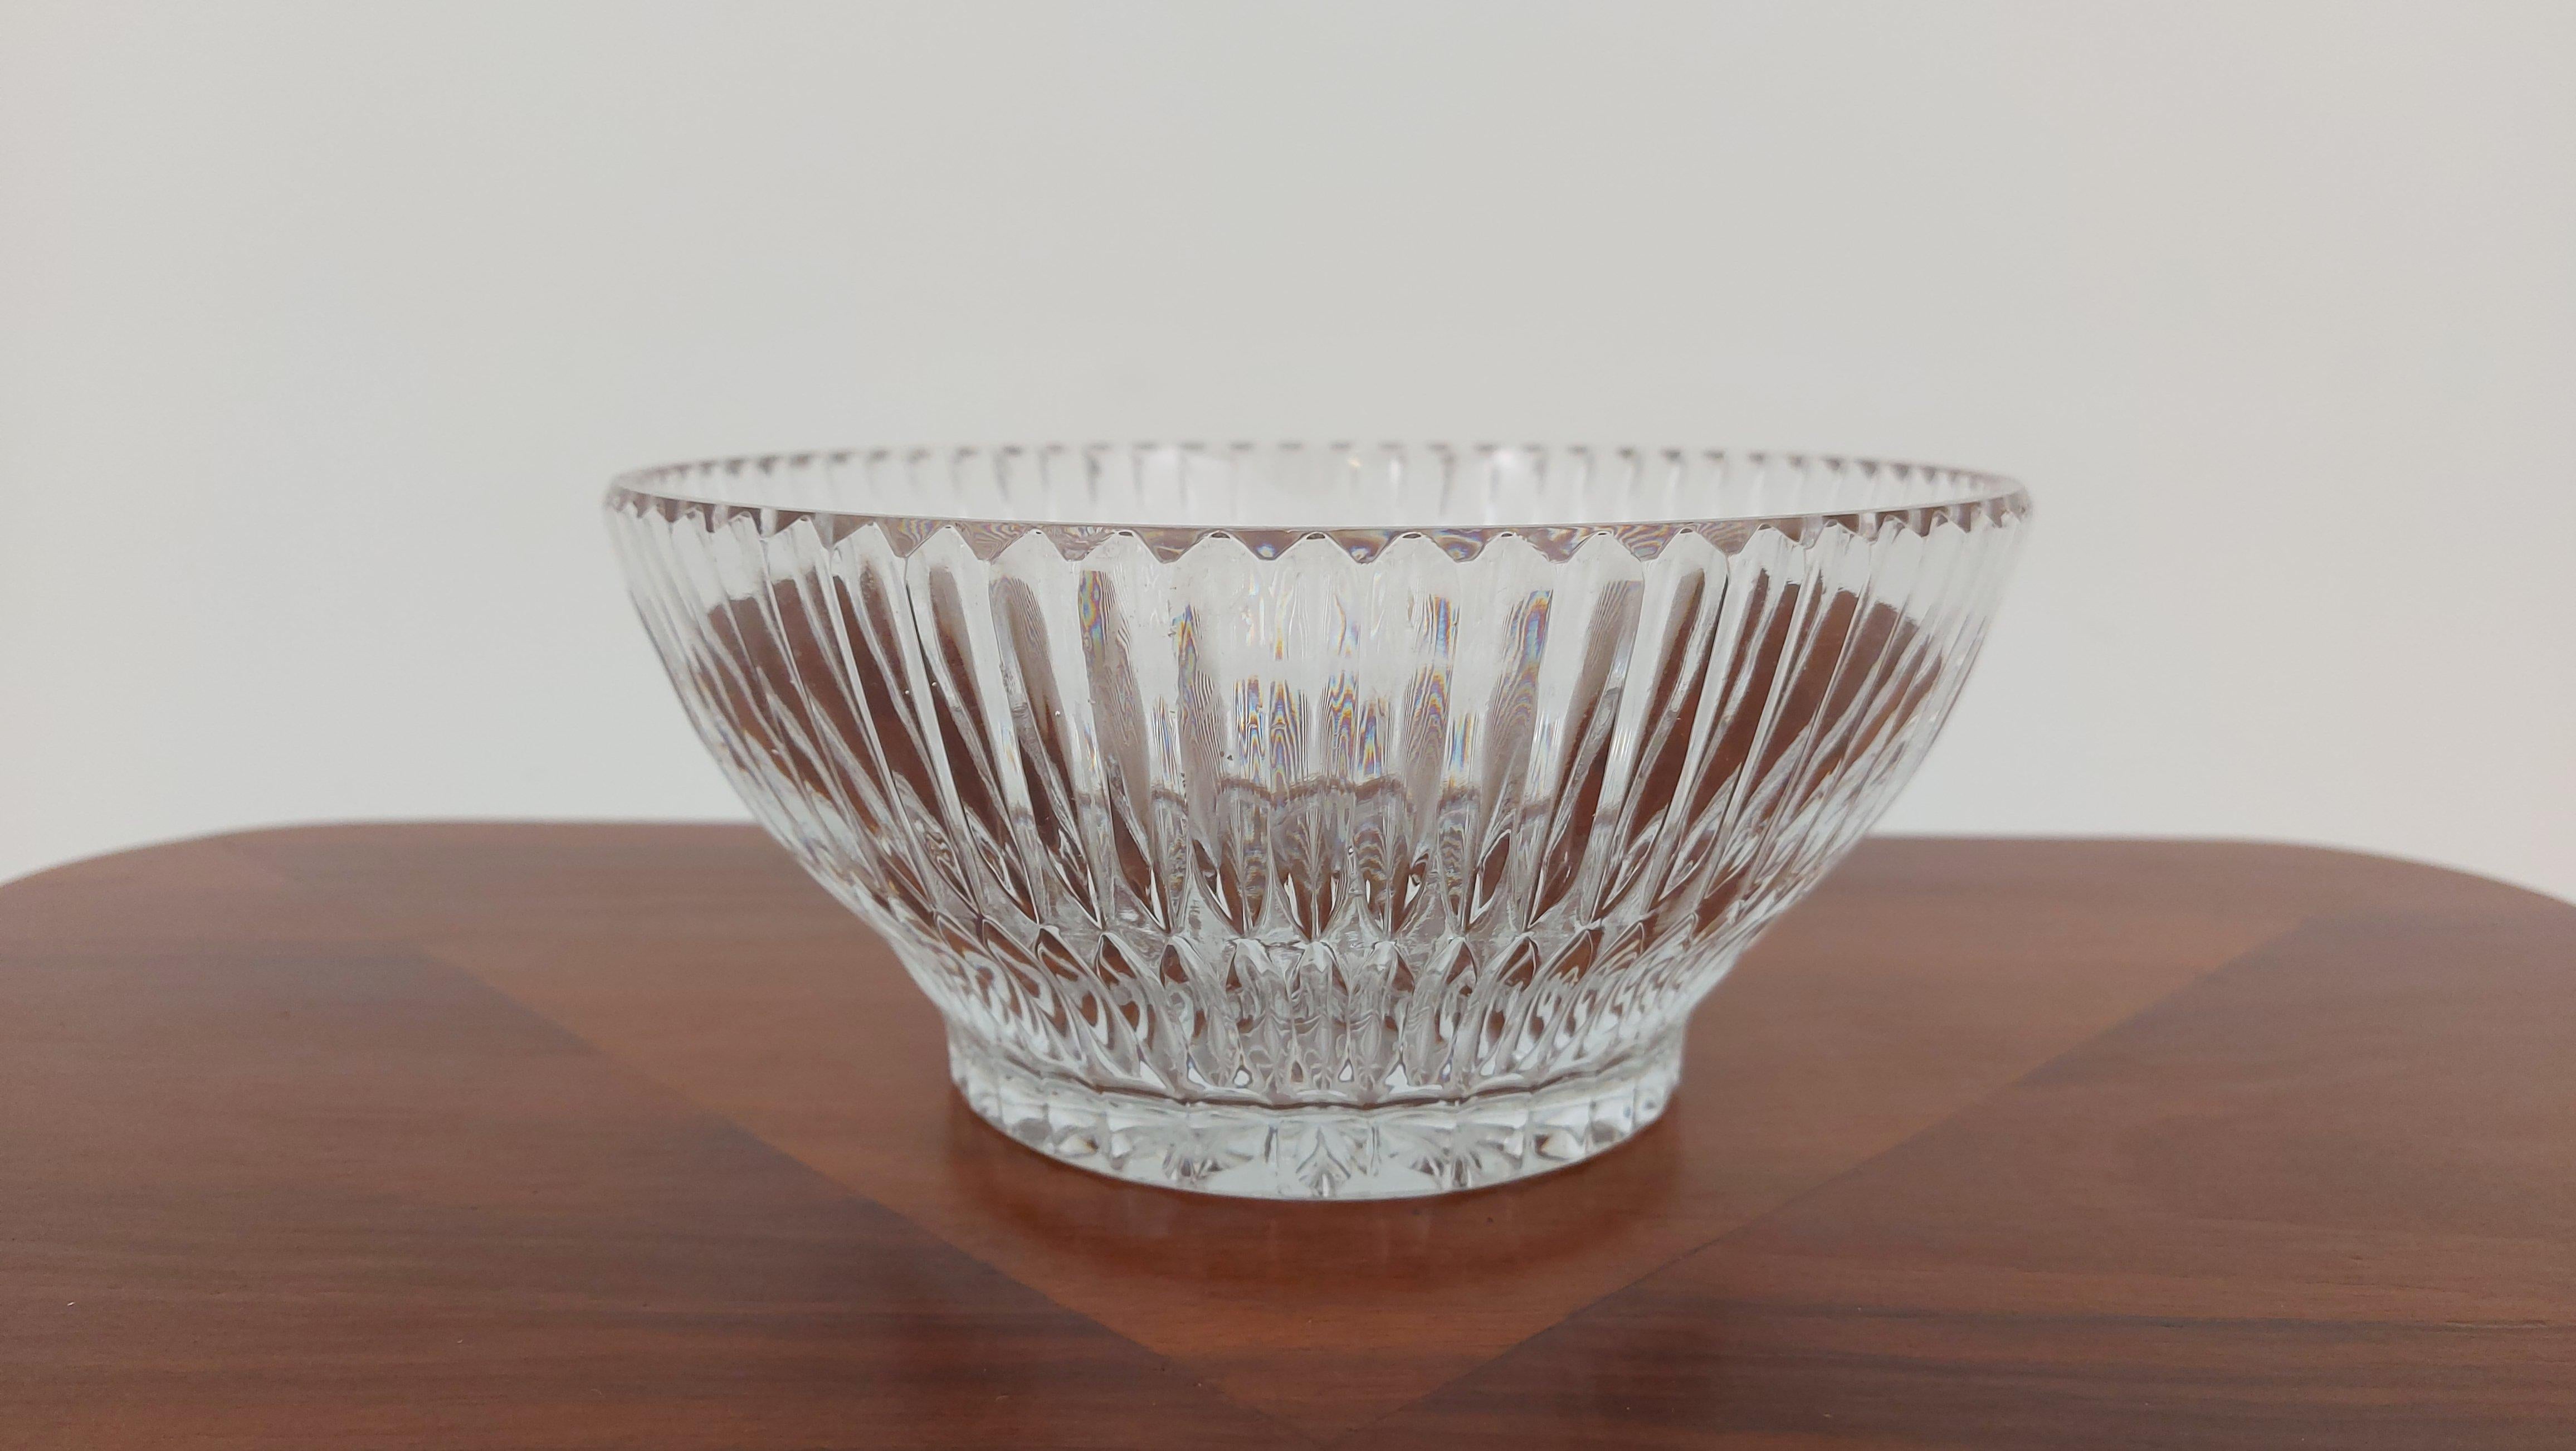 Crystal bowl for fruit or sweets.

Made in Poland in the 1950s / 1960s.

Very good condition.

Dimensions: height 9.5 cm / diameter 21 cm.